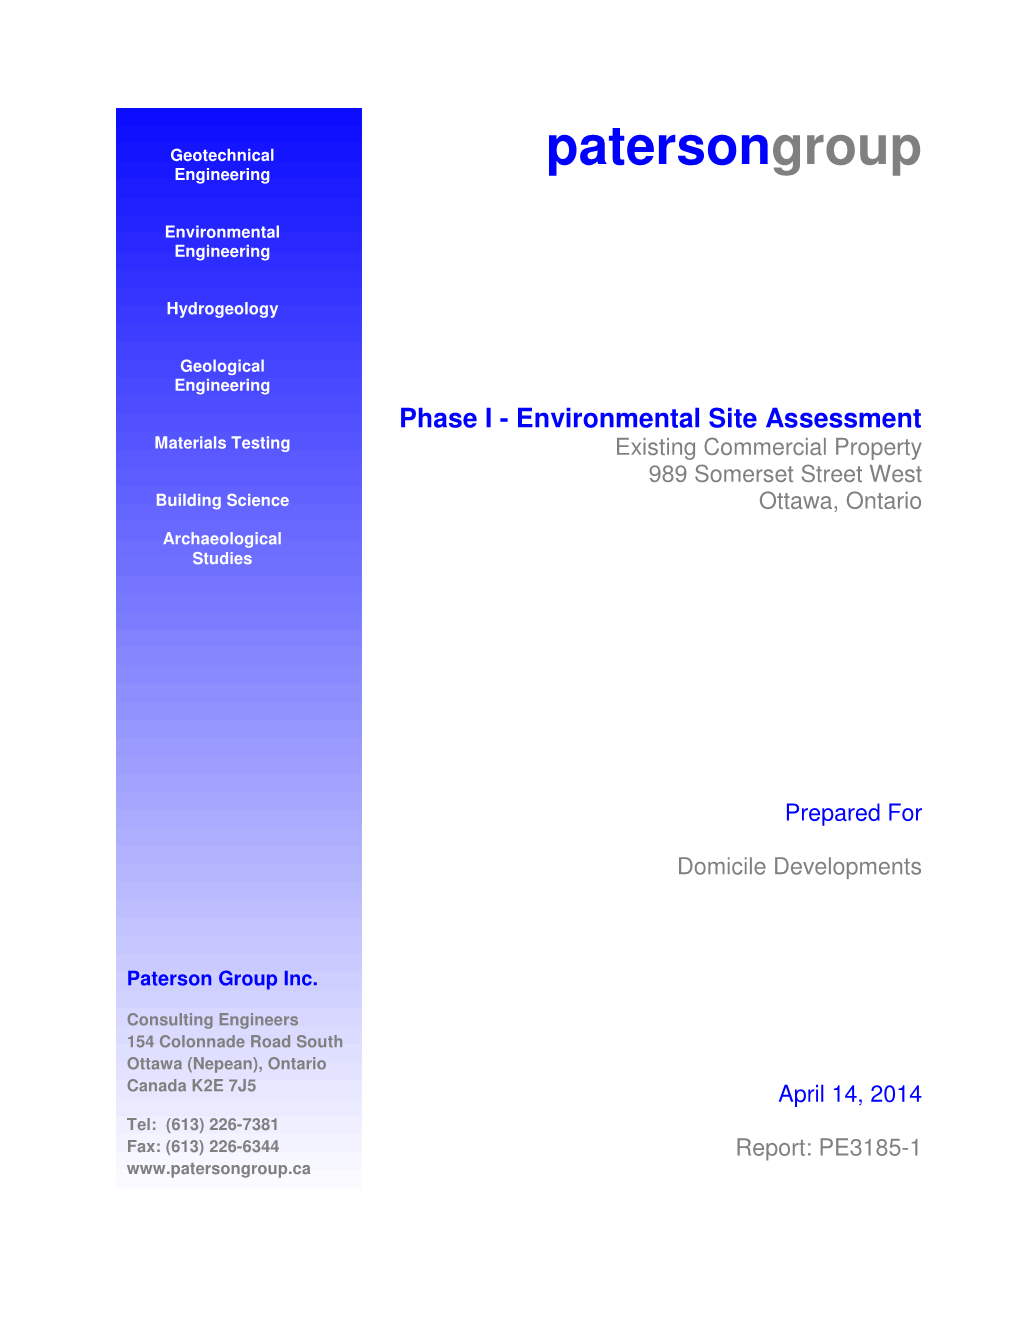 Patersongroup Phase I